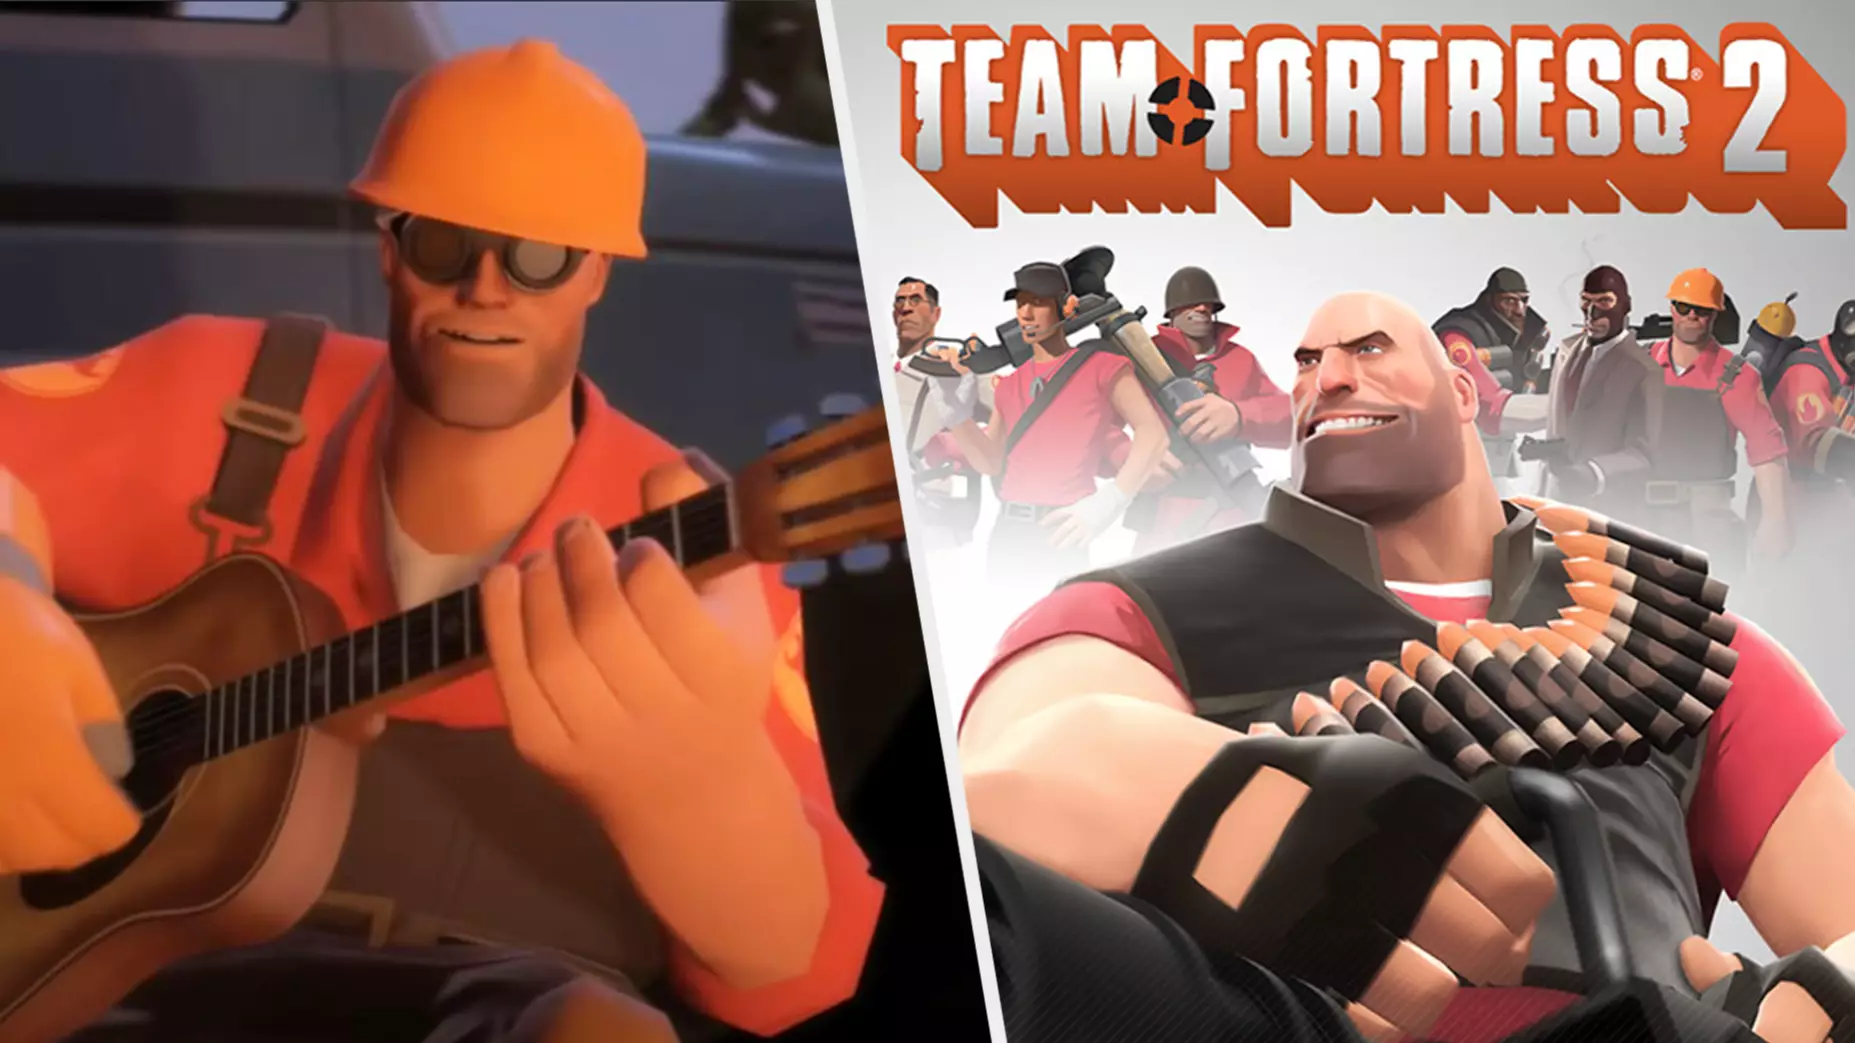 ‘Team Fortress 2’ Just Had Its Highest Number Of Players, 14 Years After Release